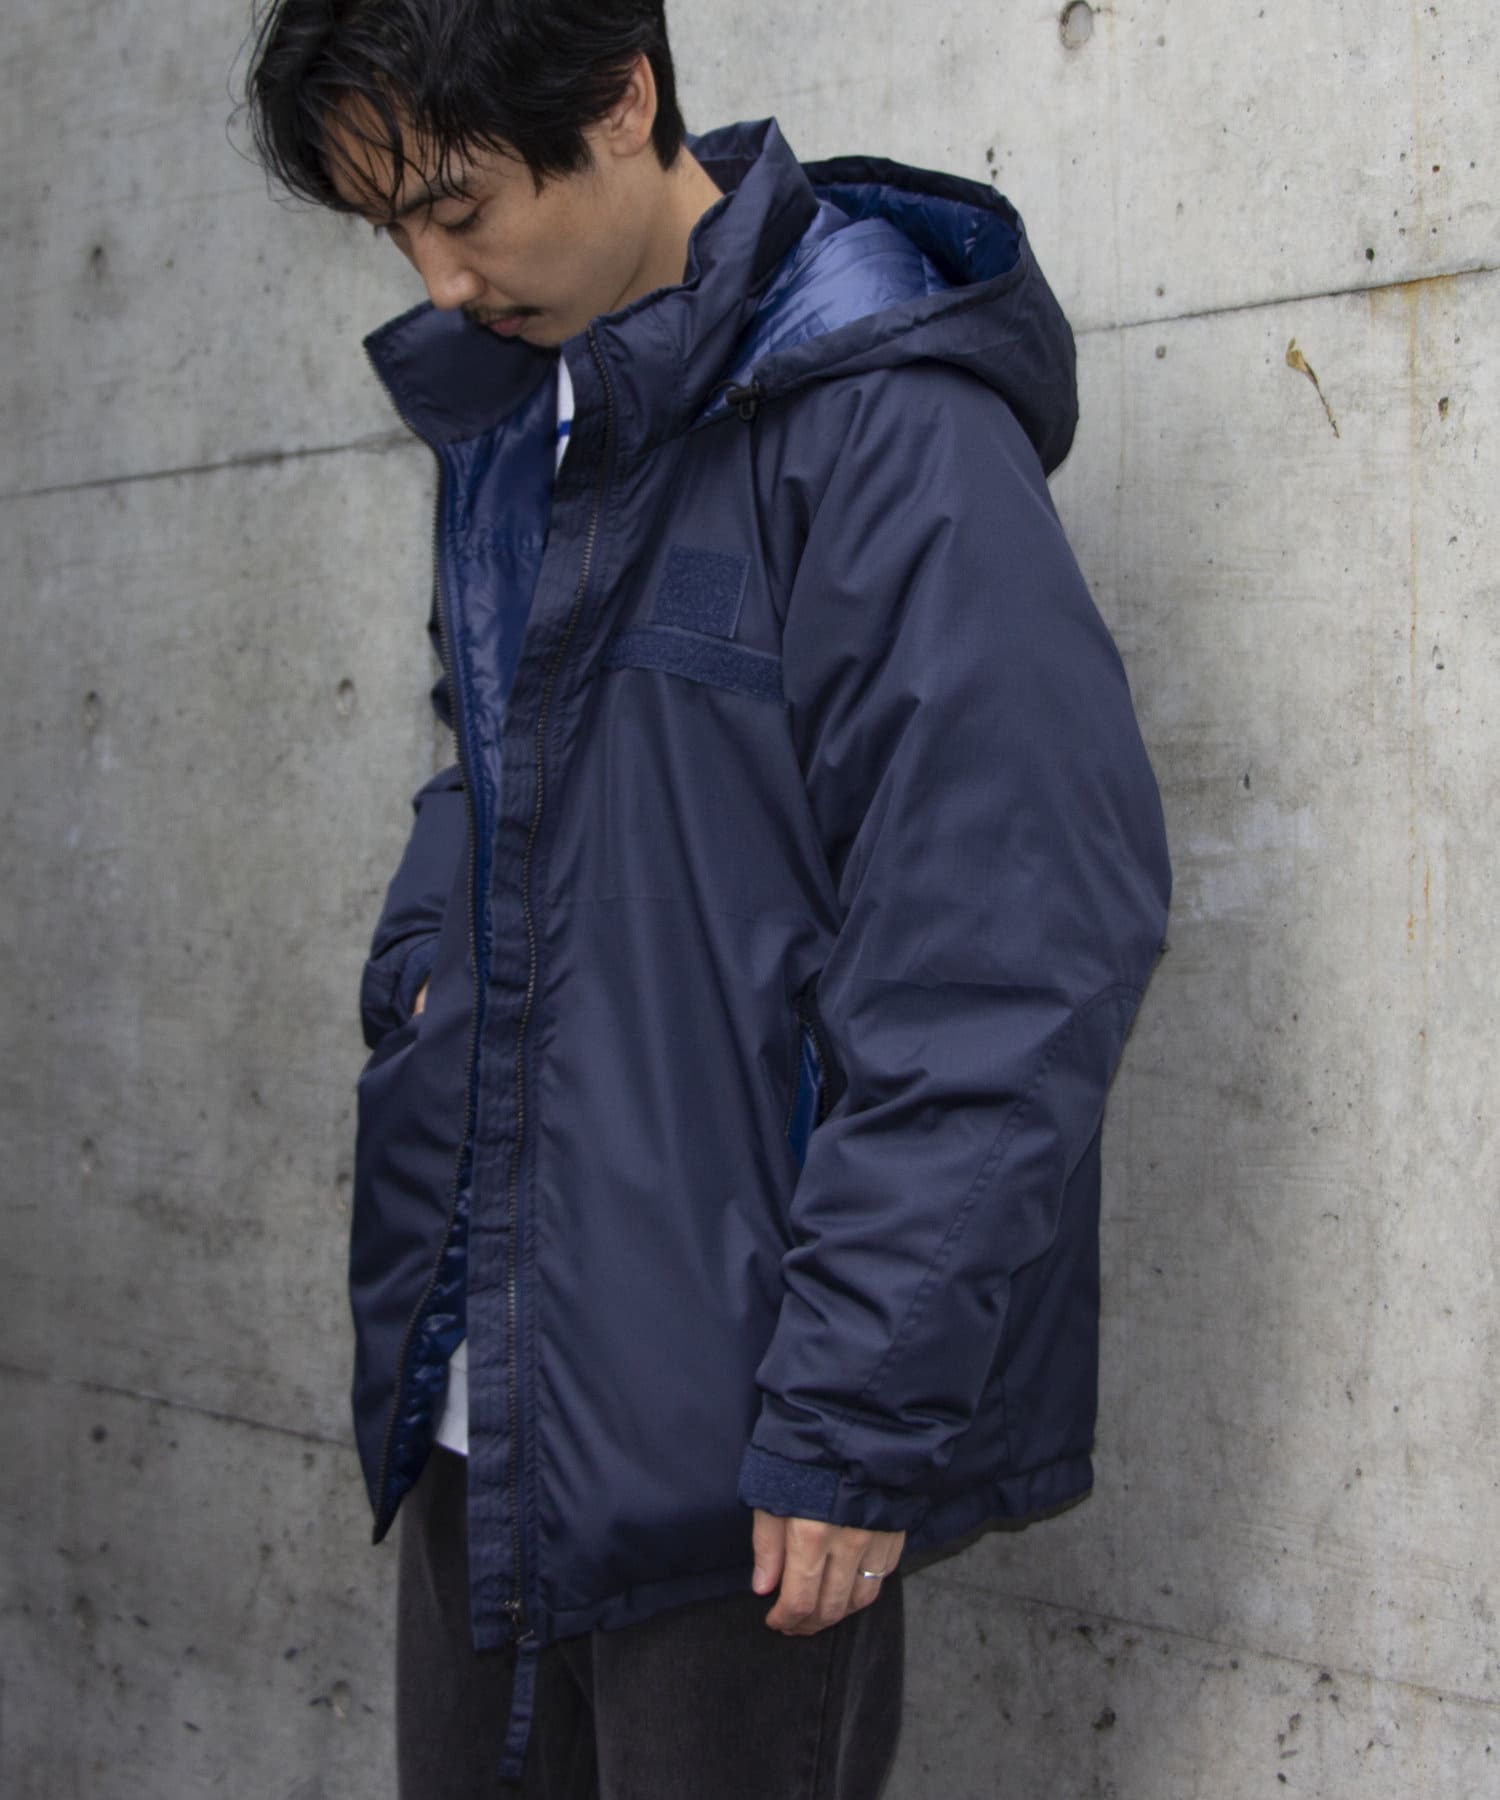 TAION】GLOSTER別注 MILITALY LEVEL7 JACKET | FREDY & GLOSTER ...